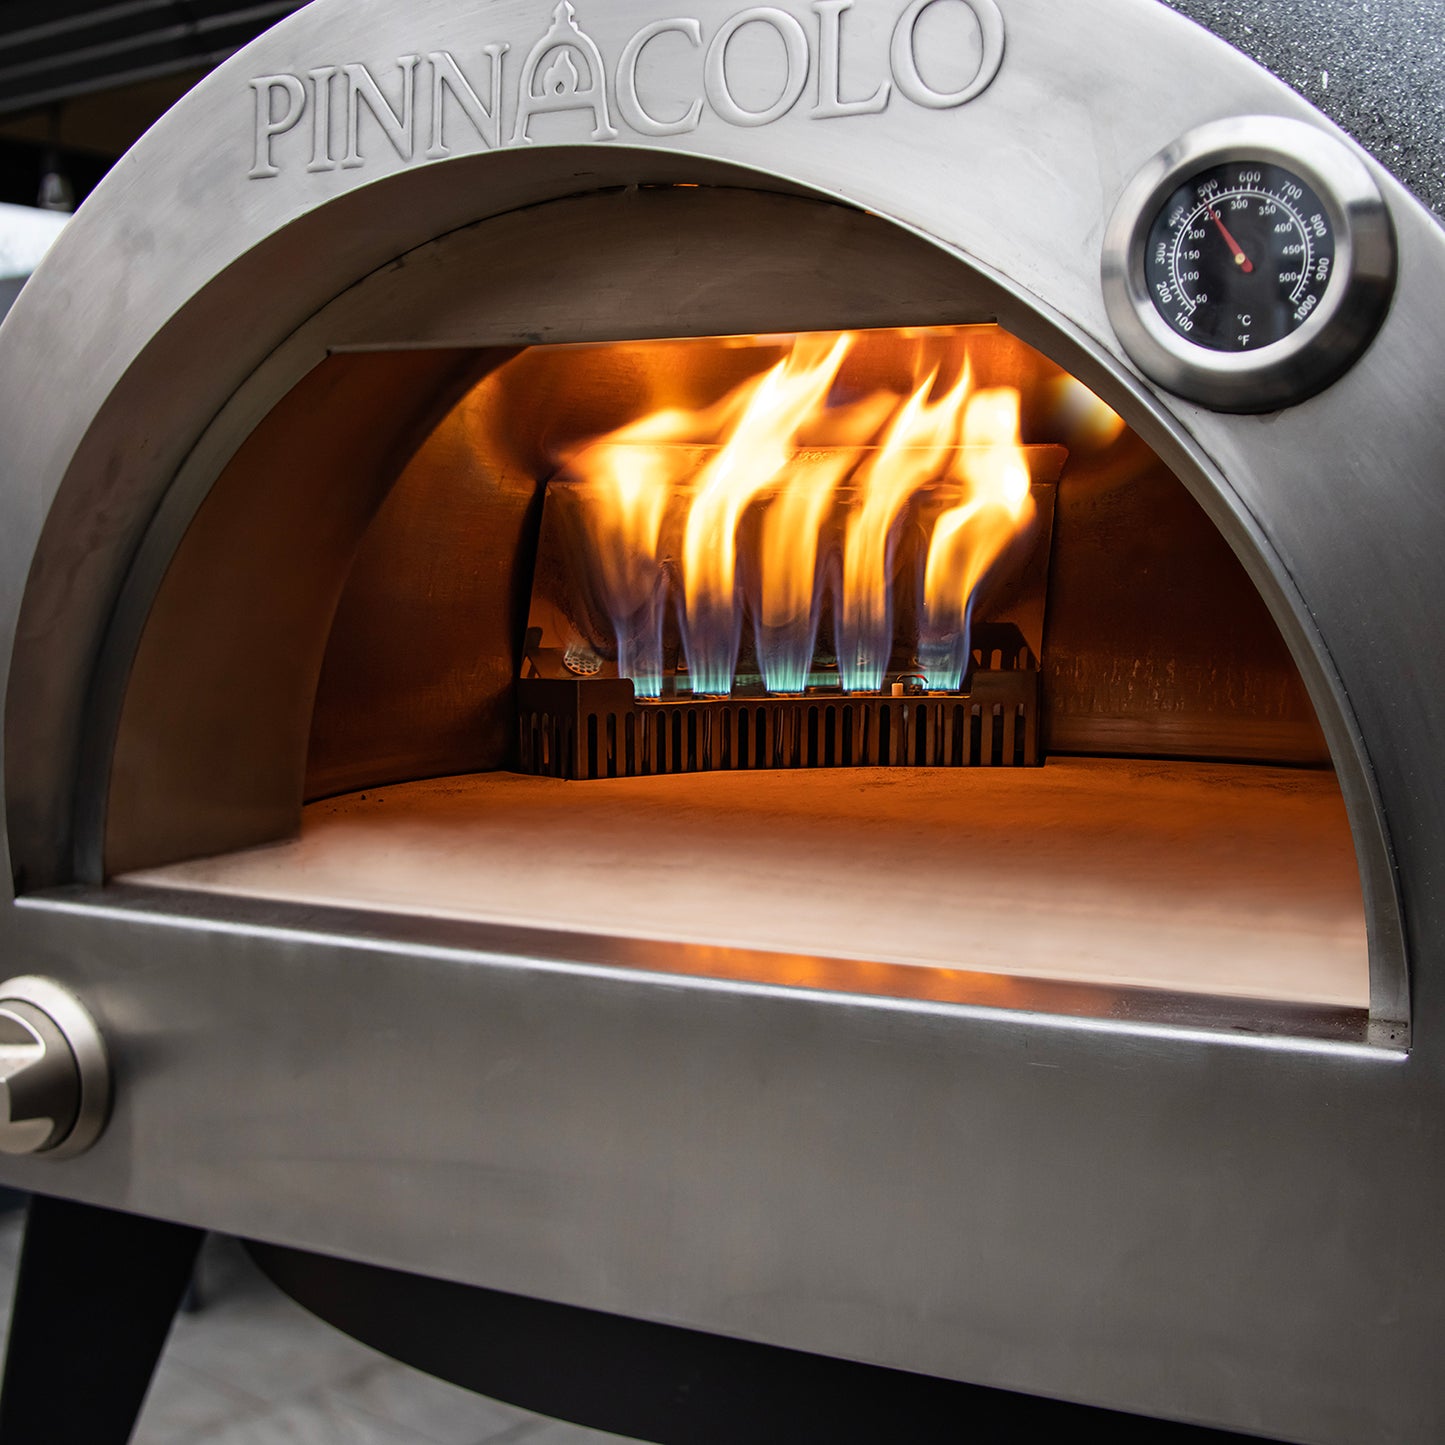 Pinnacolo L'Argilla Thermal Clay - Gas Powered Oven - FREE accessories